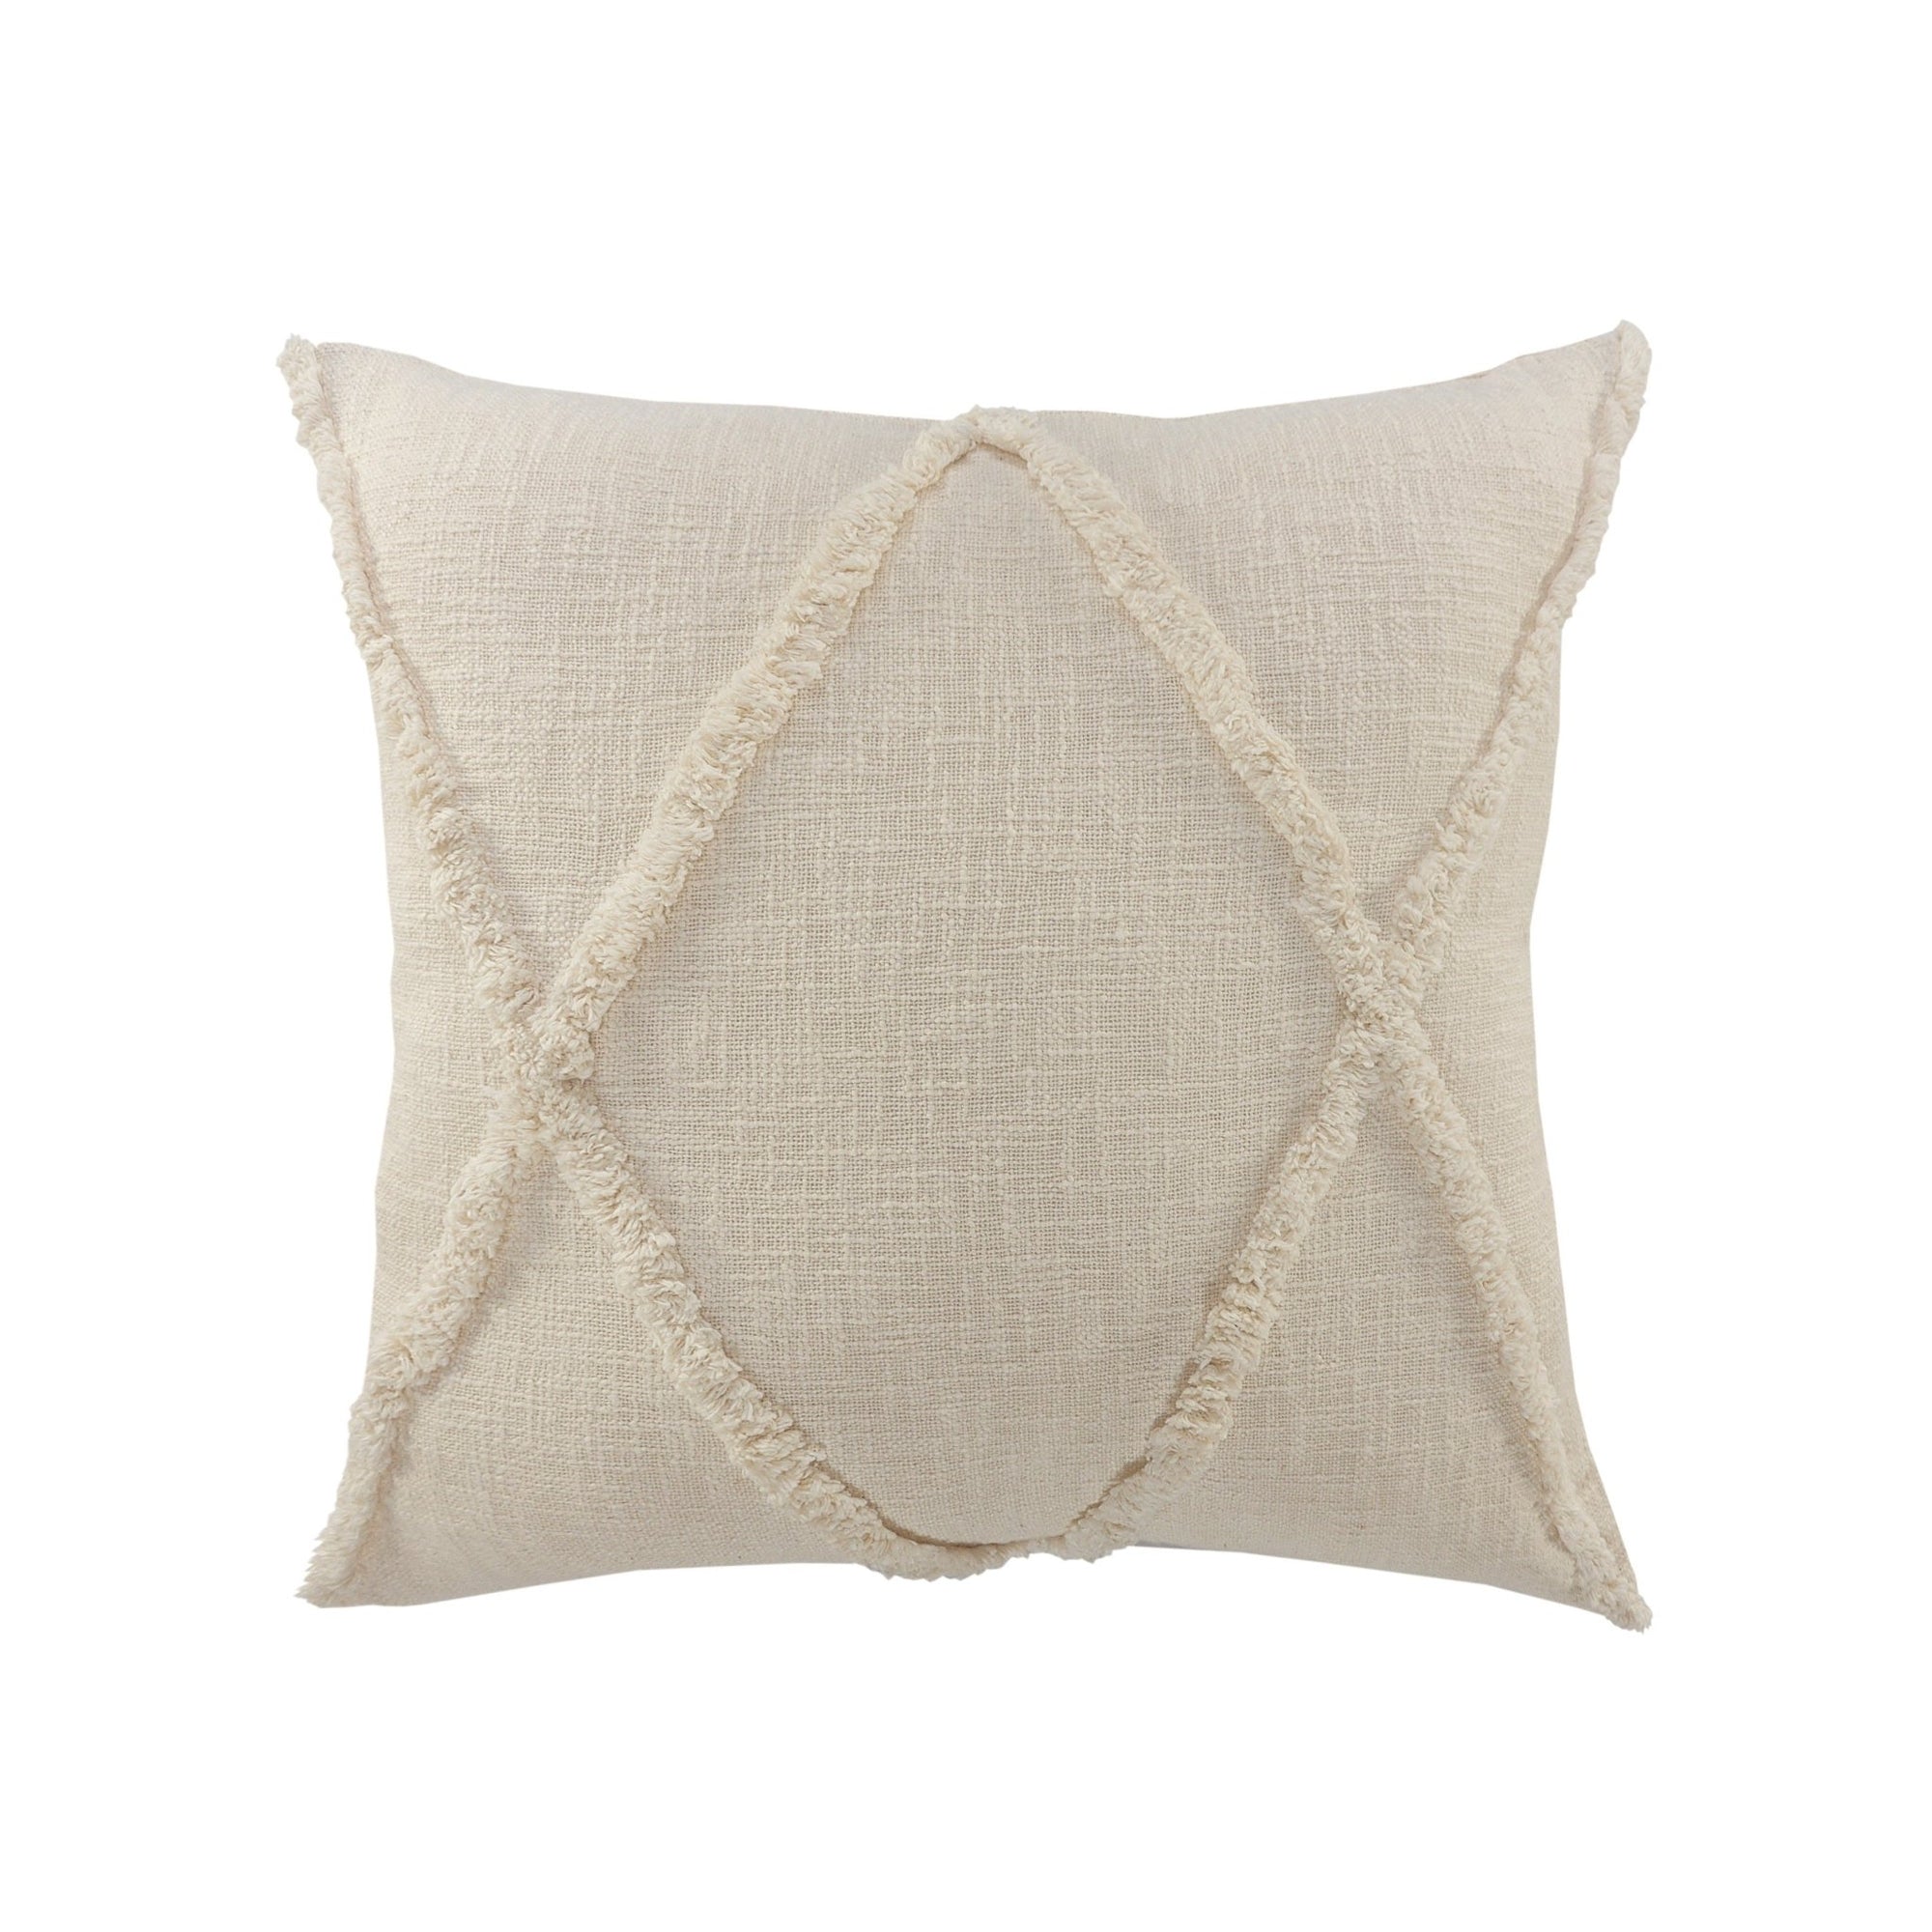 Reese Lr07324 Ivory Pillow - Rug & Home